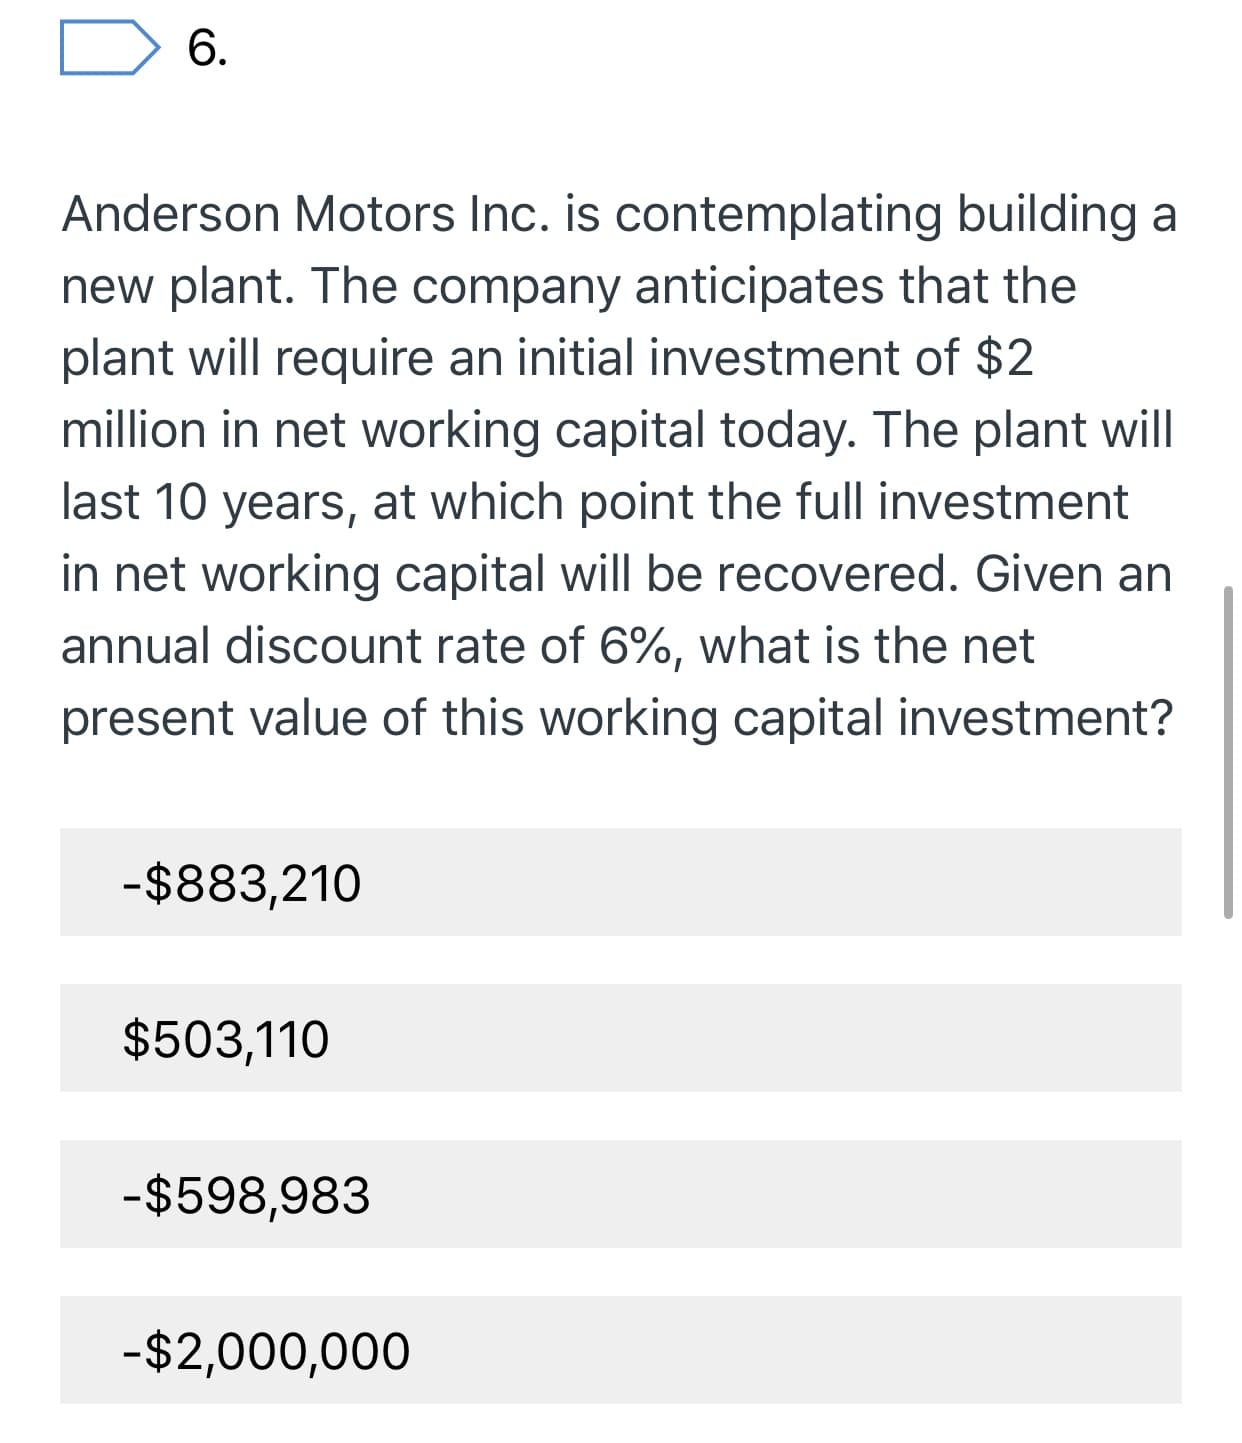 6.
Anderson Motors Inc. is contemplating building a
new plant. The company anticipates that the
plant will require an initial investment of $2
million in net working capital today. The plant will
last 10 years, at which point the full investment
in net working capital will be recovered. Given an
annual discount rate of 6%, what is the net
present value of this working capital investment?
-$883,210
$503,110
-$598,983
-$2,000,000
